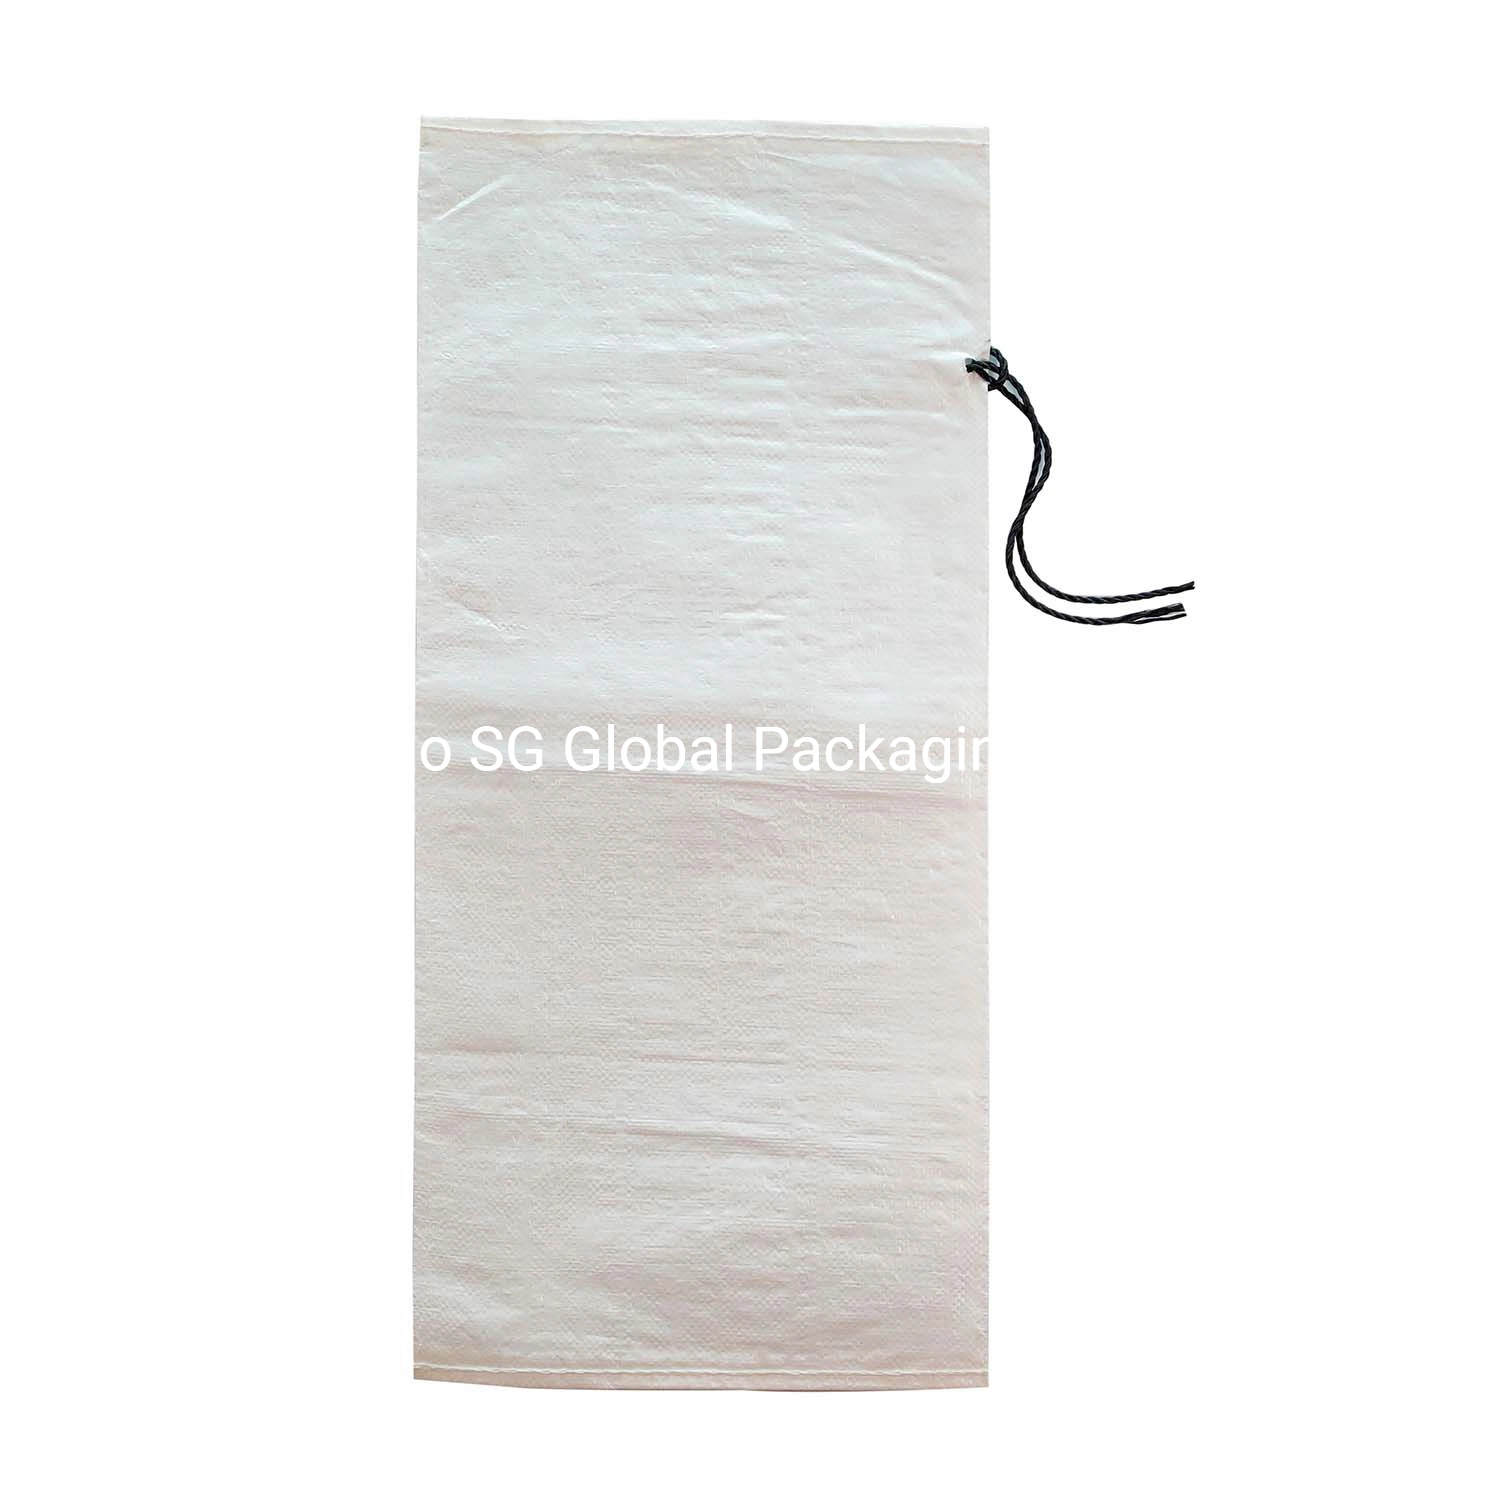 Anti-UV Sand Bag with Tie String PP Virgin Recycled Anti-Flood Recyclable Poly Plastic Woven Bag